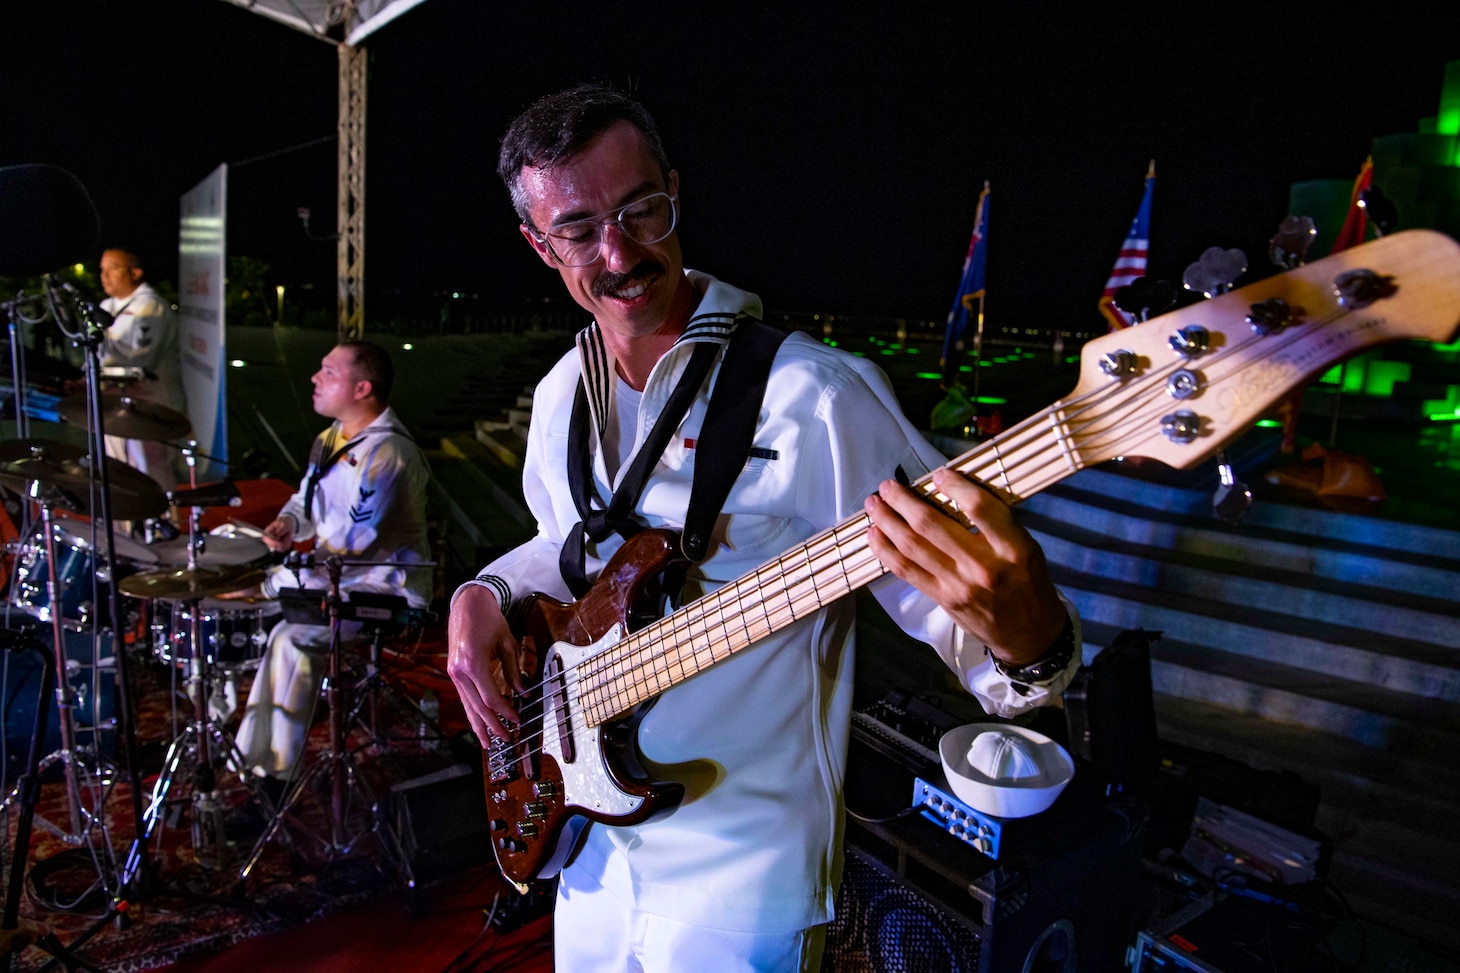 PHU YEN, Vietnam (June 20, 2022) – Musician 3rd Class Erik Muench, from Wekiva Springs, Florida, a bass guitarist in the Commander, U.S. Pacific Fleet Rock Band, performs during the Pacific Partnership 2022 Vietnam Opening Ceremony. Now in its 17th year, Pacific Partnership is the largest annual multinational humanitarian assistance and disaster relief preparedness mission conducted in the Indo-Pacific. (U.S. Navy photo by Mass Communication Specialist 1st Class Shamira Purifoy)